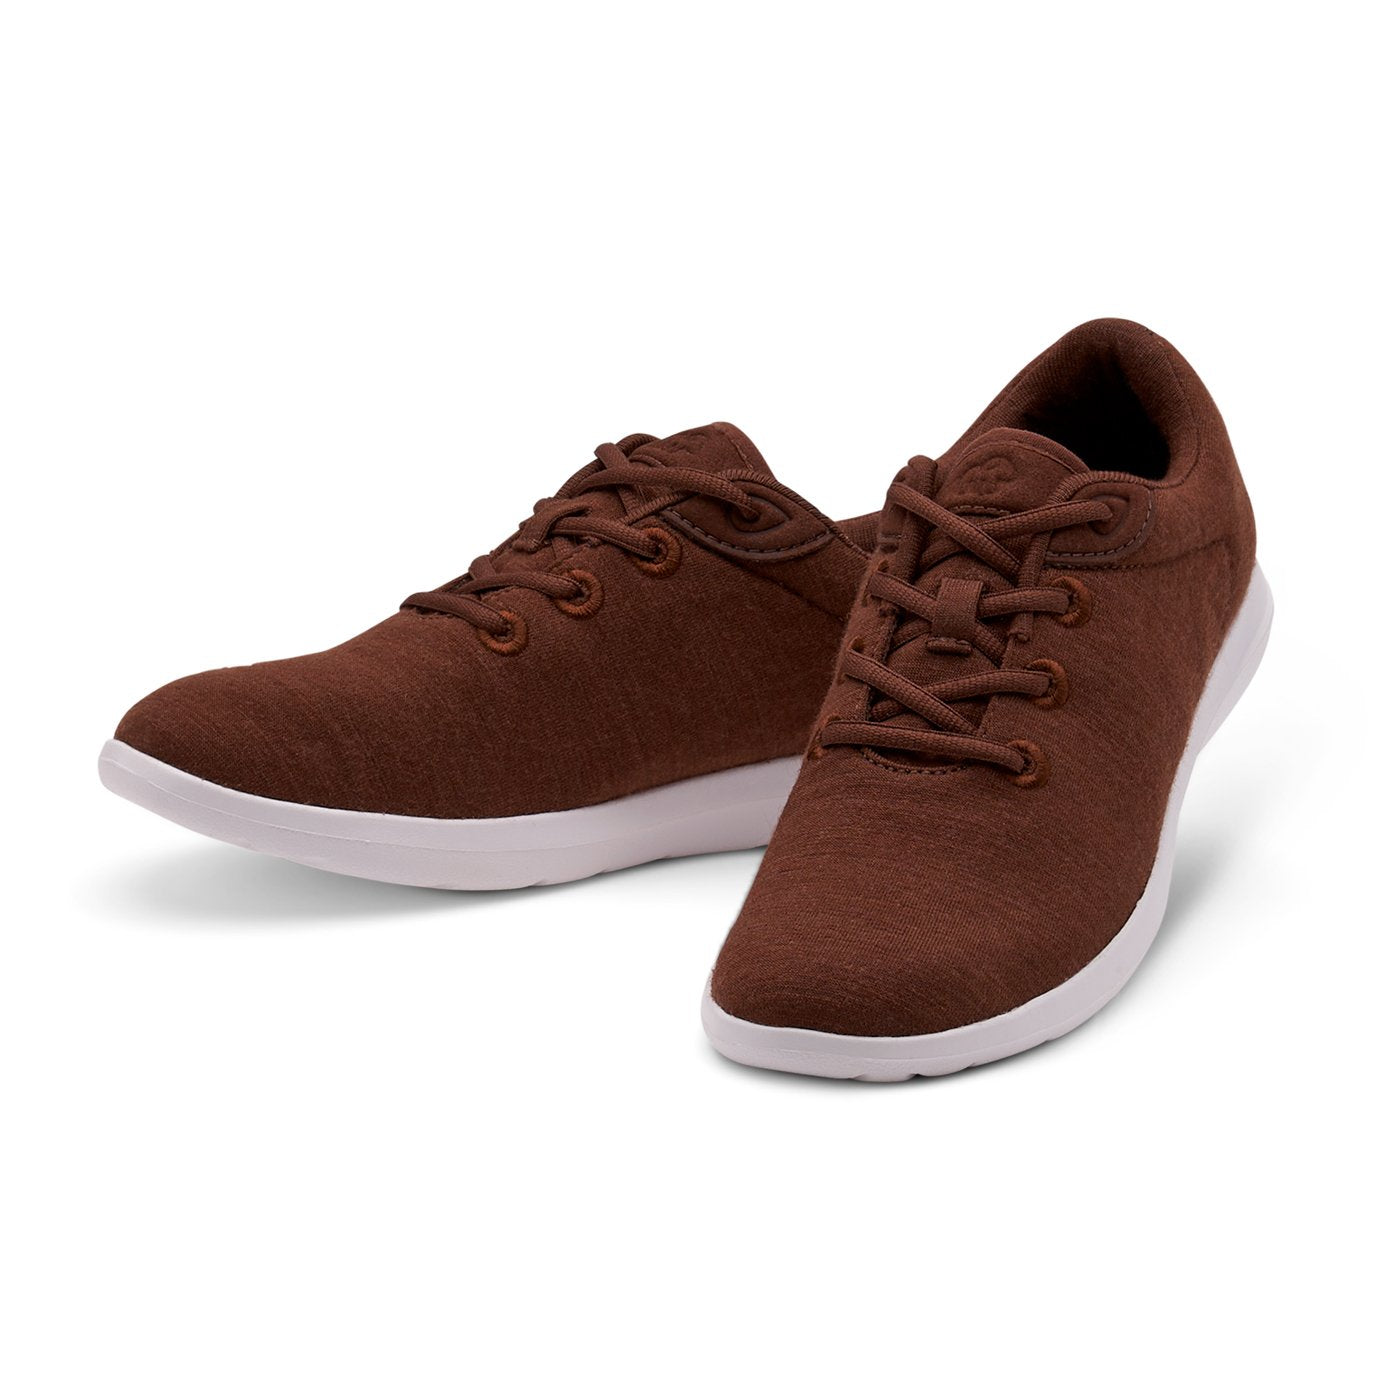 Men's Lace-Ups Brown - Special Offer